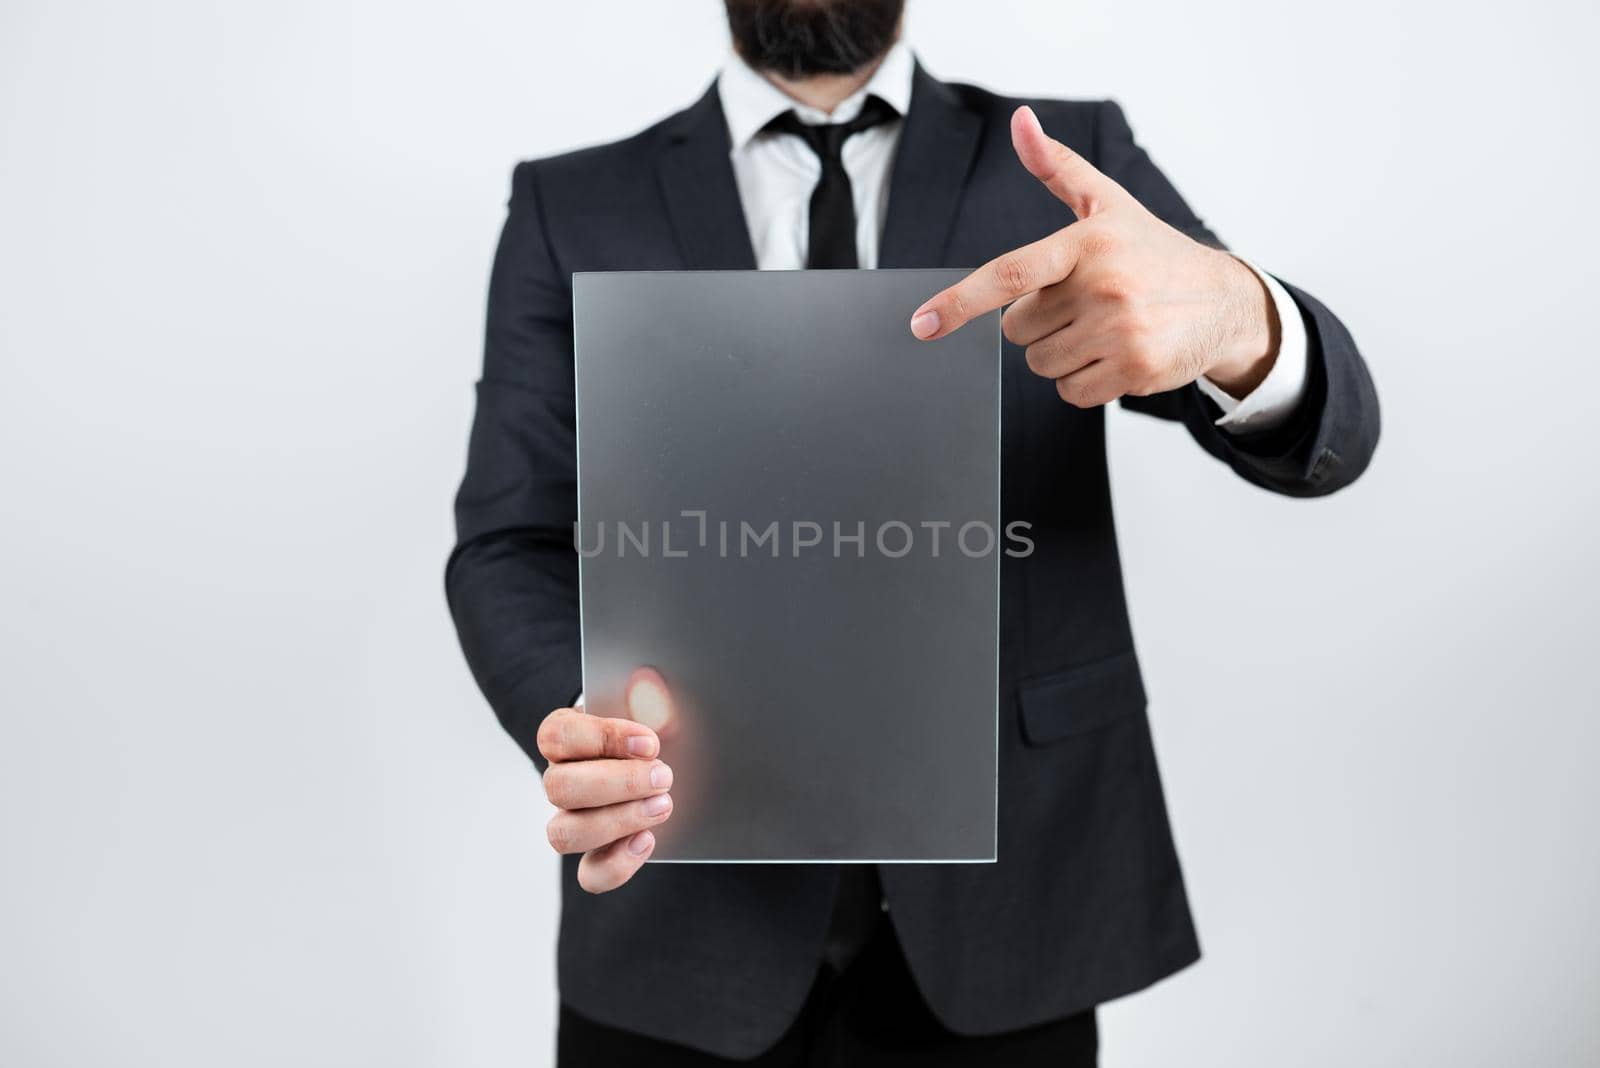 Male Professional Holding Blank Placard And Displaying Business Data. Businessman Wearing Suit Showing Rectangular Board For Marketing And Advertising The Company. by nialowwa